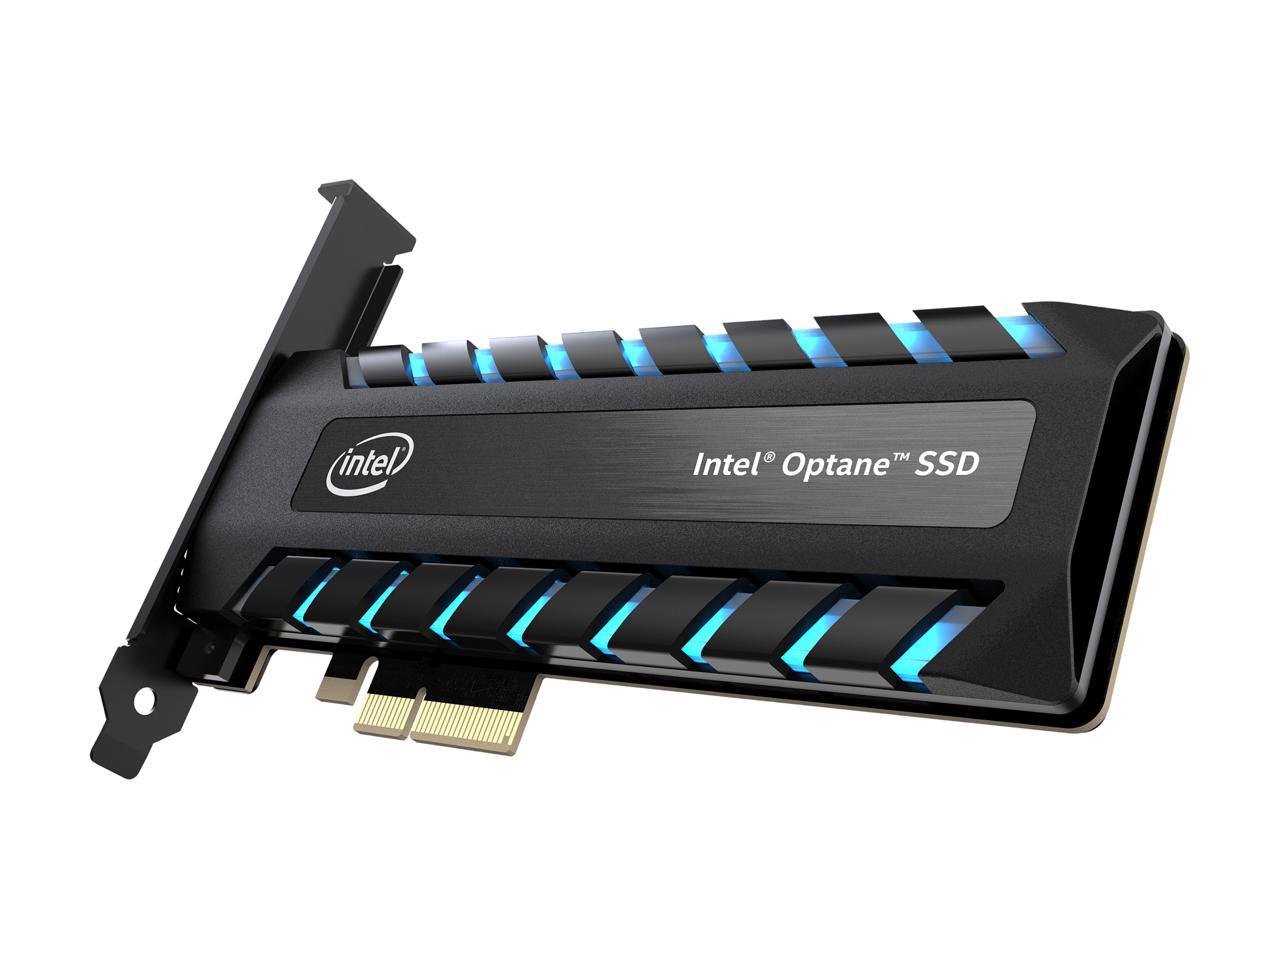 Intel Optane SSD 905P Series - 960GB, 1/2 Height PCIe x4, 20nm, 3D XPoint Solid State Drive (SSD) - SSDPED1D960GAX1